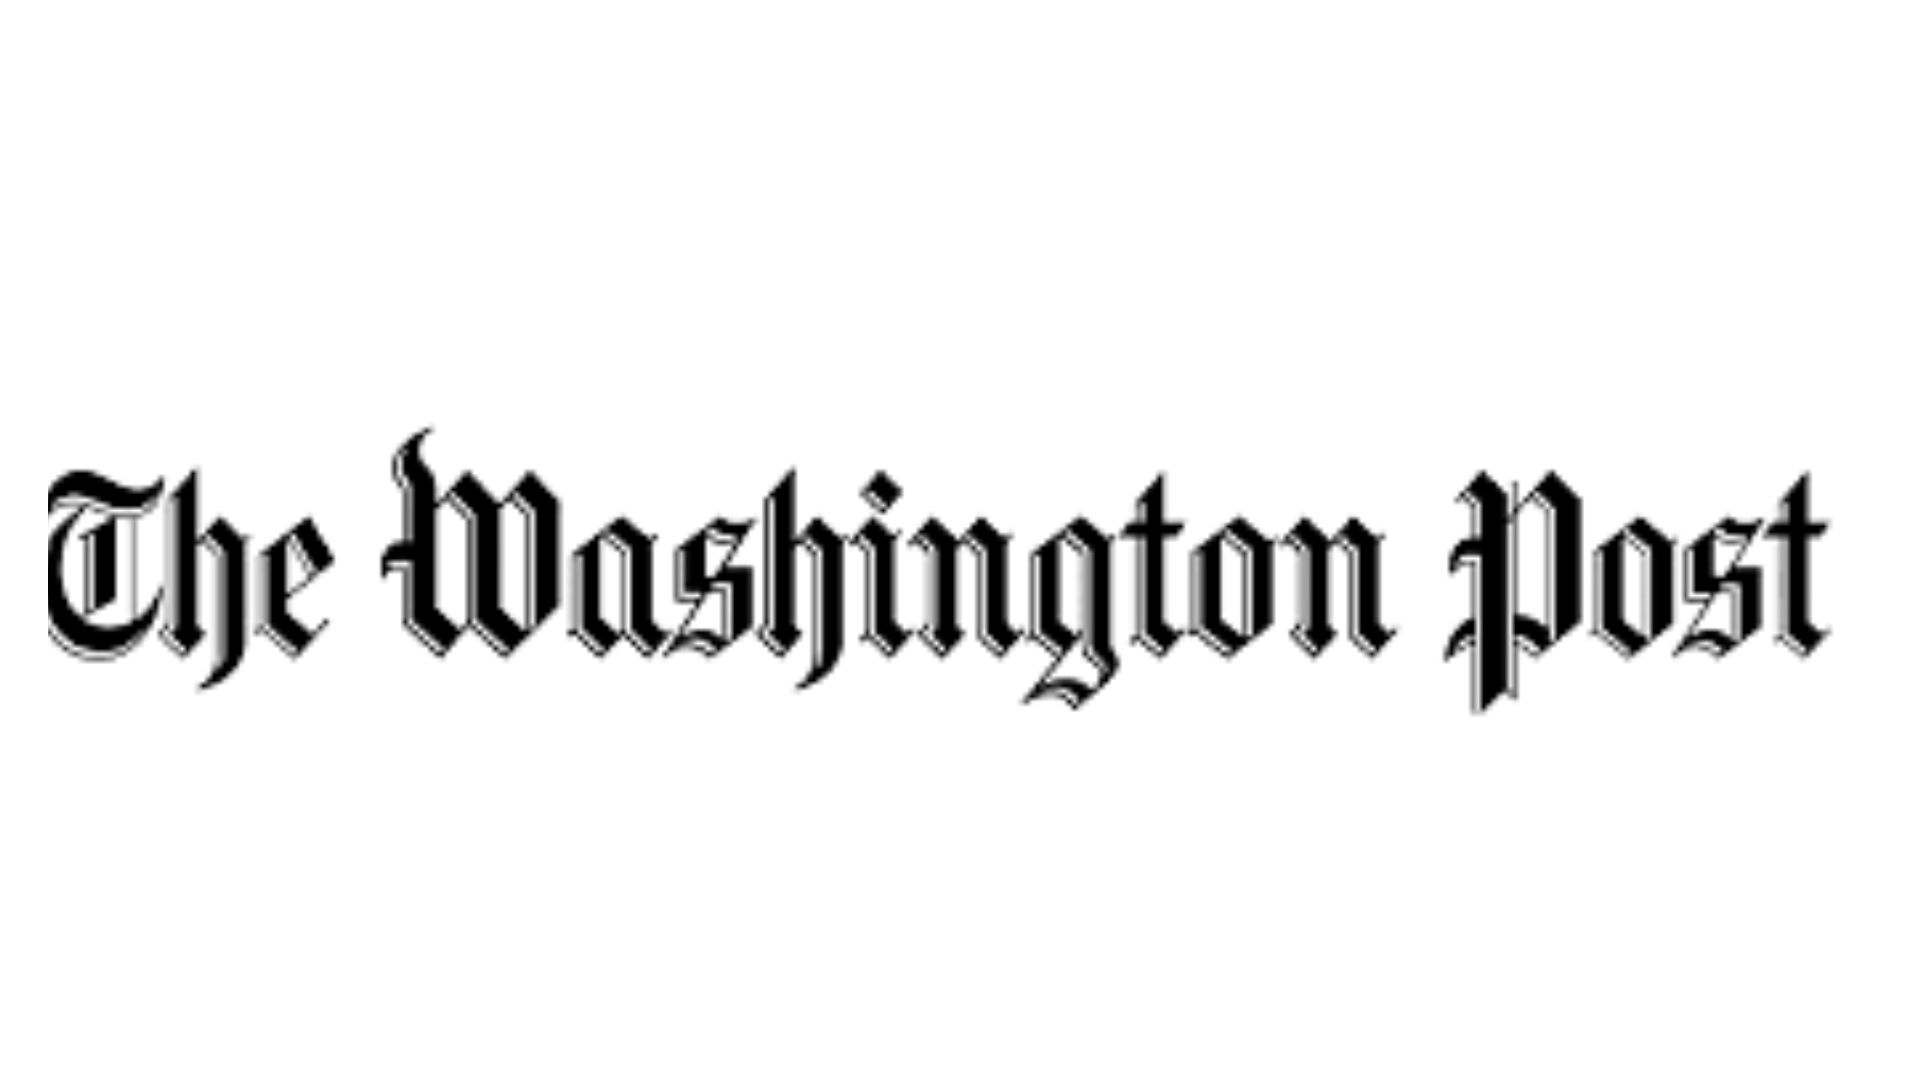 Washington post incorporate service by NumberSquad